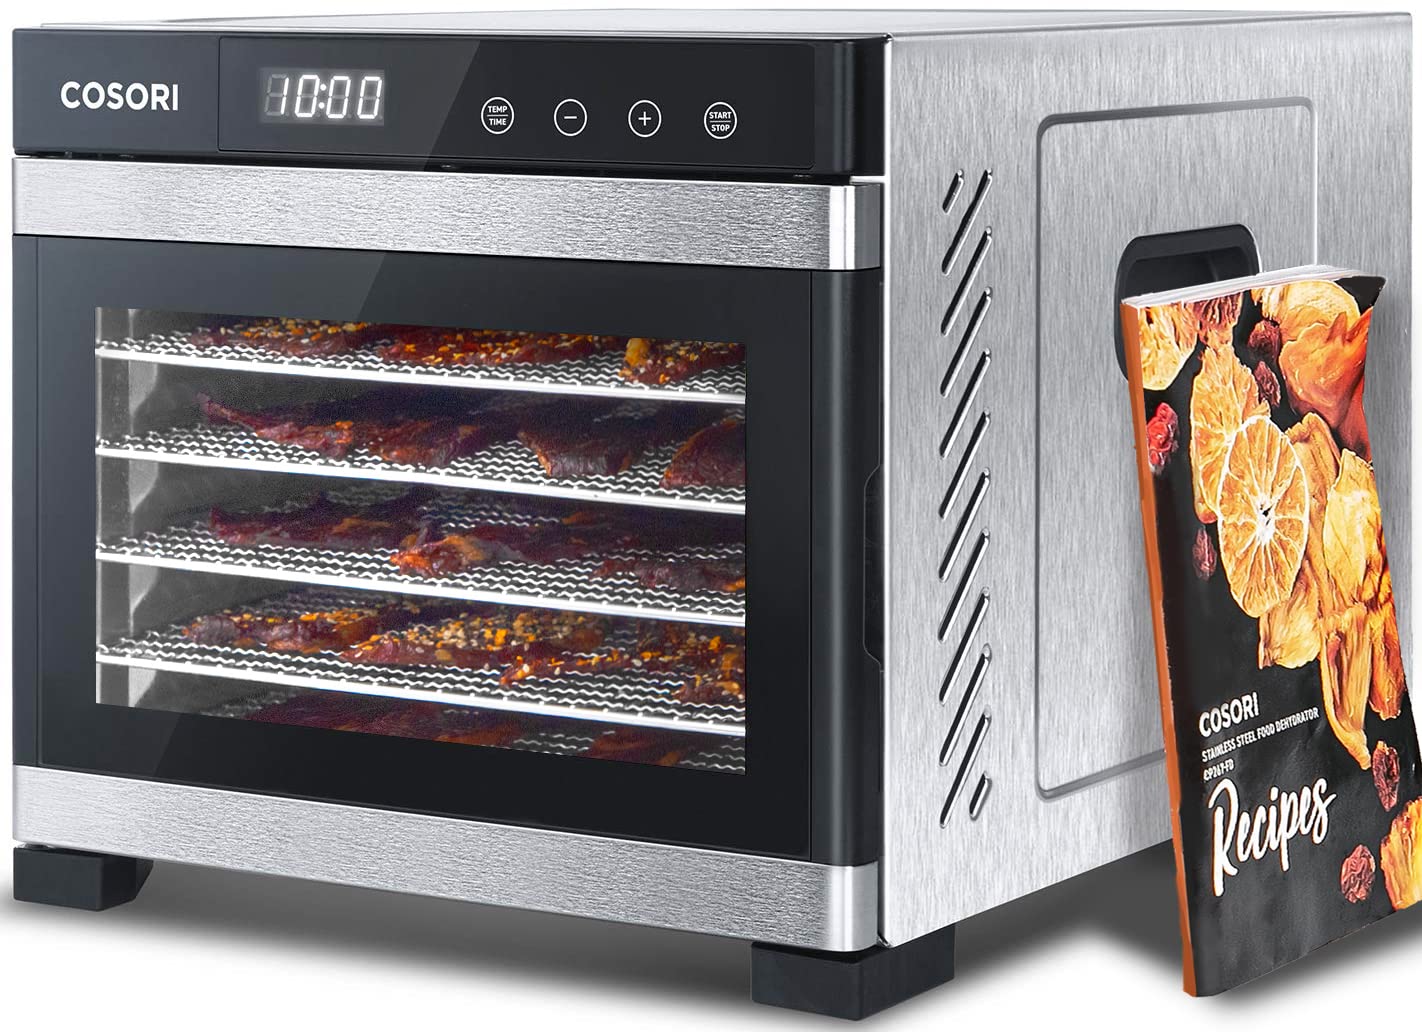 COSORI Food Dehydrator for Jerky, Large Drying Space with 6.48ft², 600W Dehydrated Dryer, 6 Stainless Steel Trays, 48H Timer, 165°F Temperature Control,Only $135.99